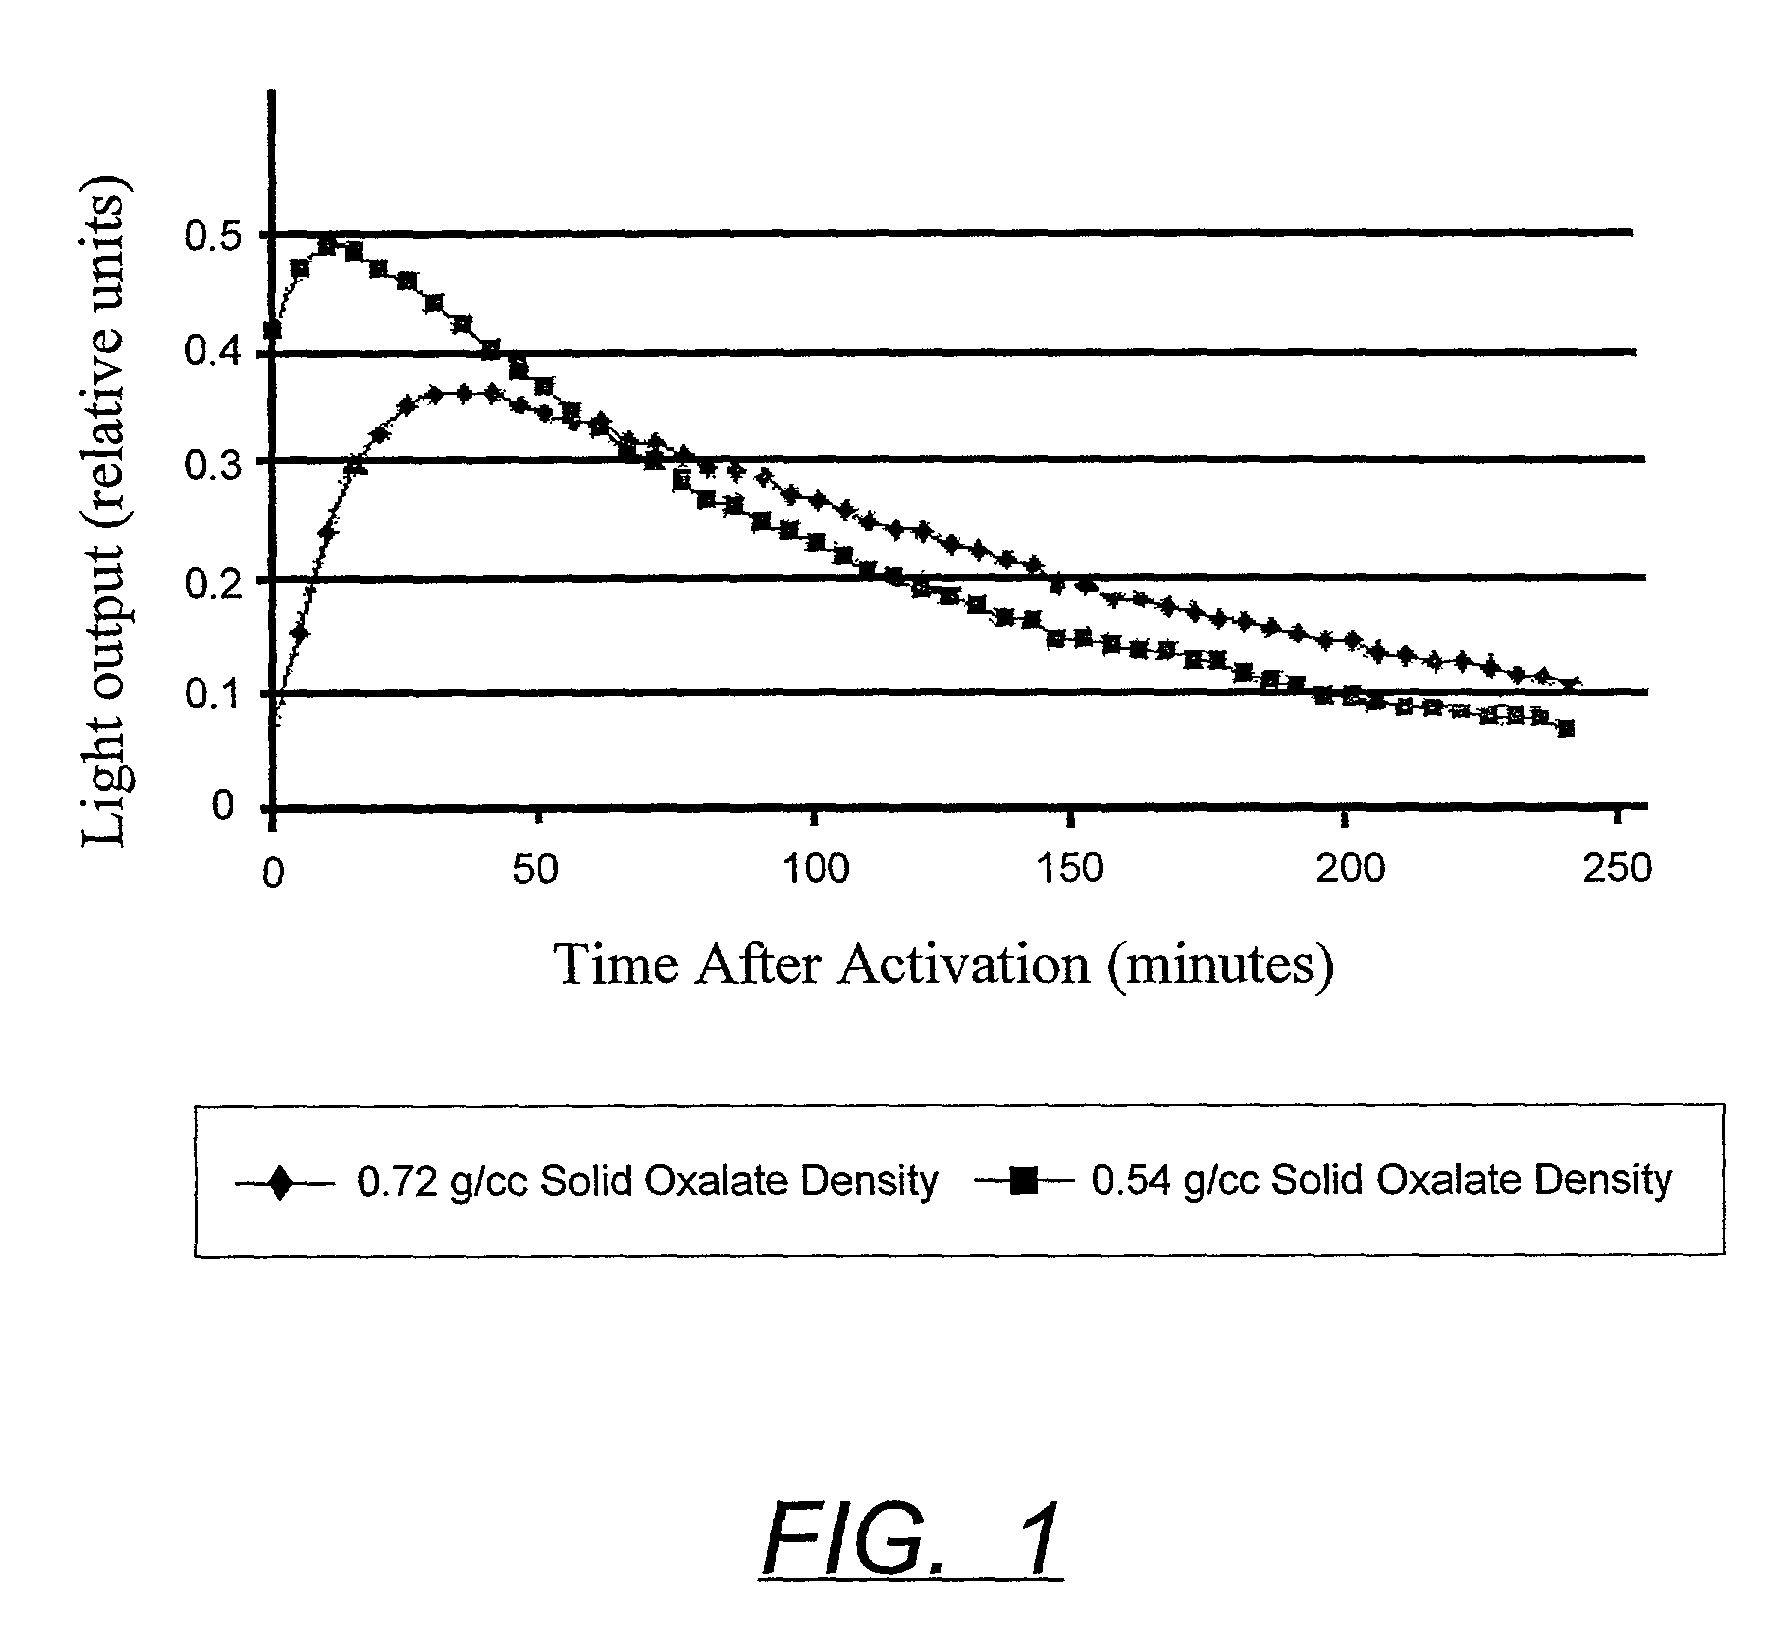 Formable, porous, chemiluminescent reactant composition and device therefor